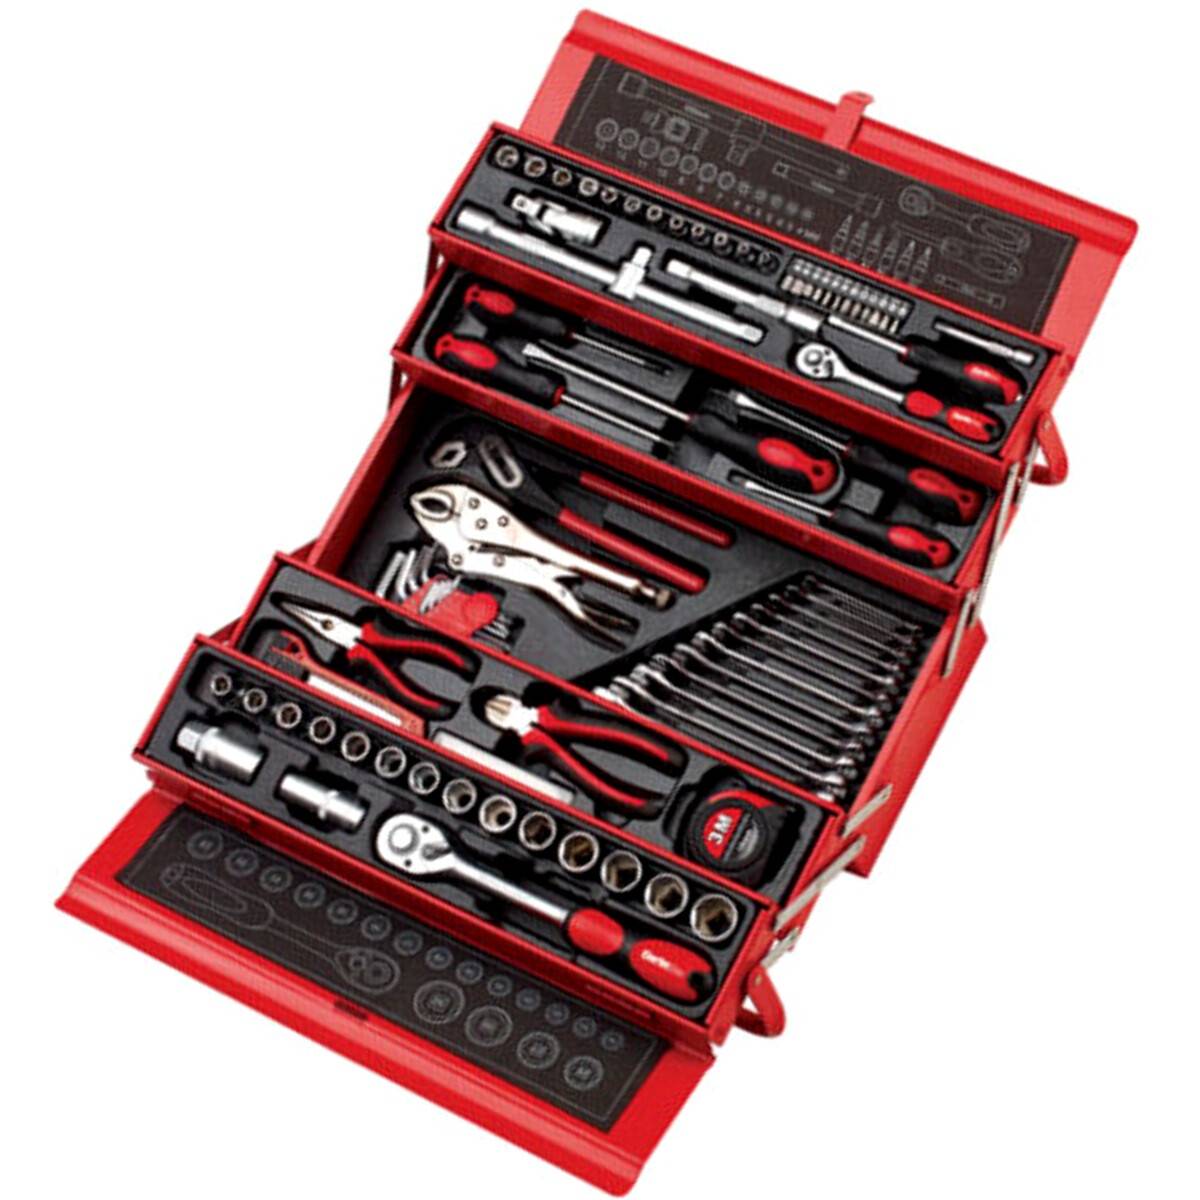 Clarke PRO394 90 Piece Tool Kit with Cantilever Toolbox 1700800 from Lawson  HIS